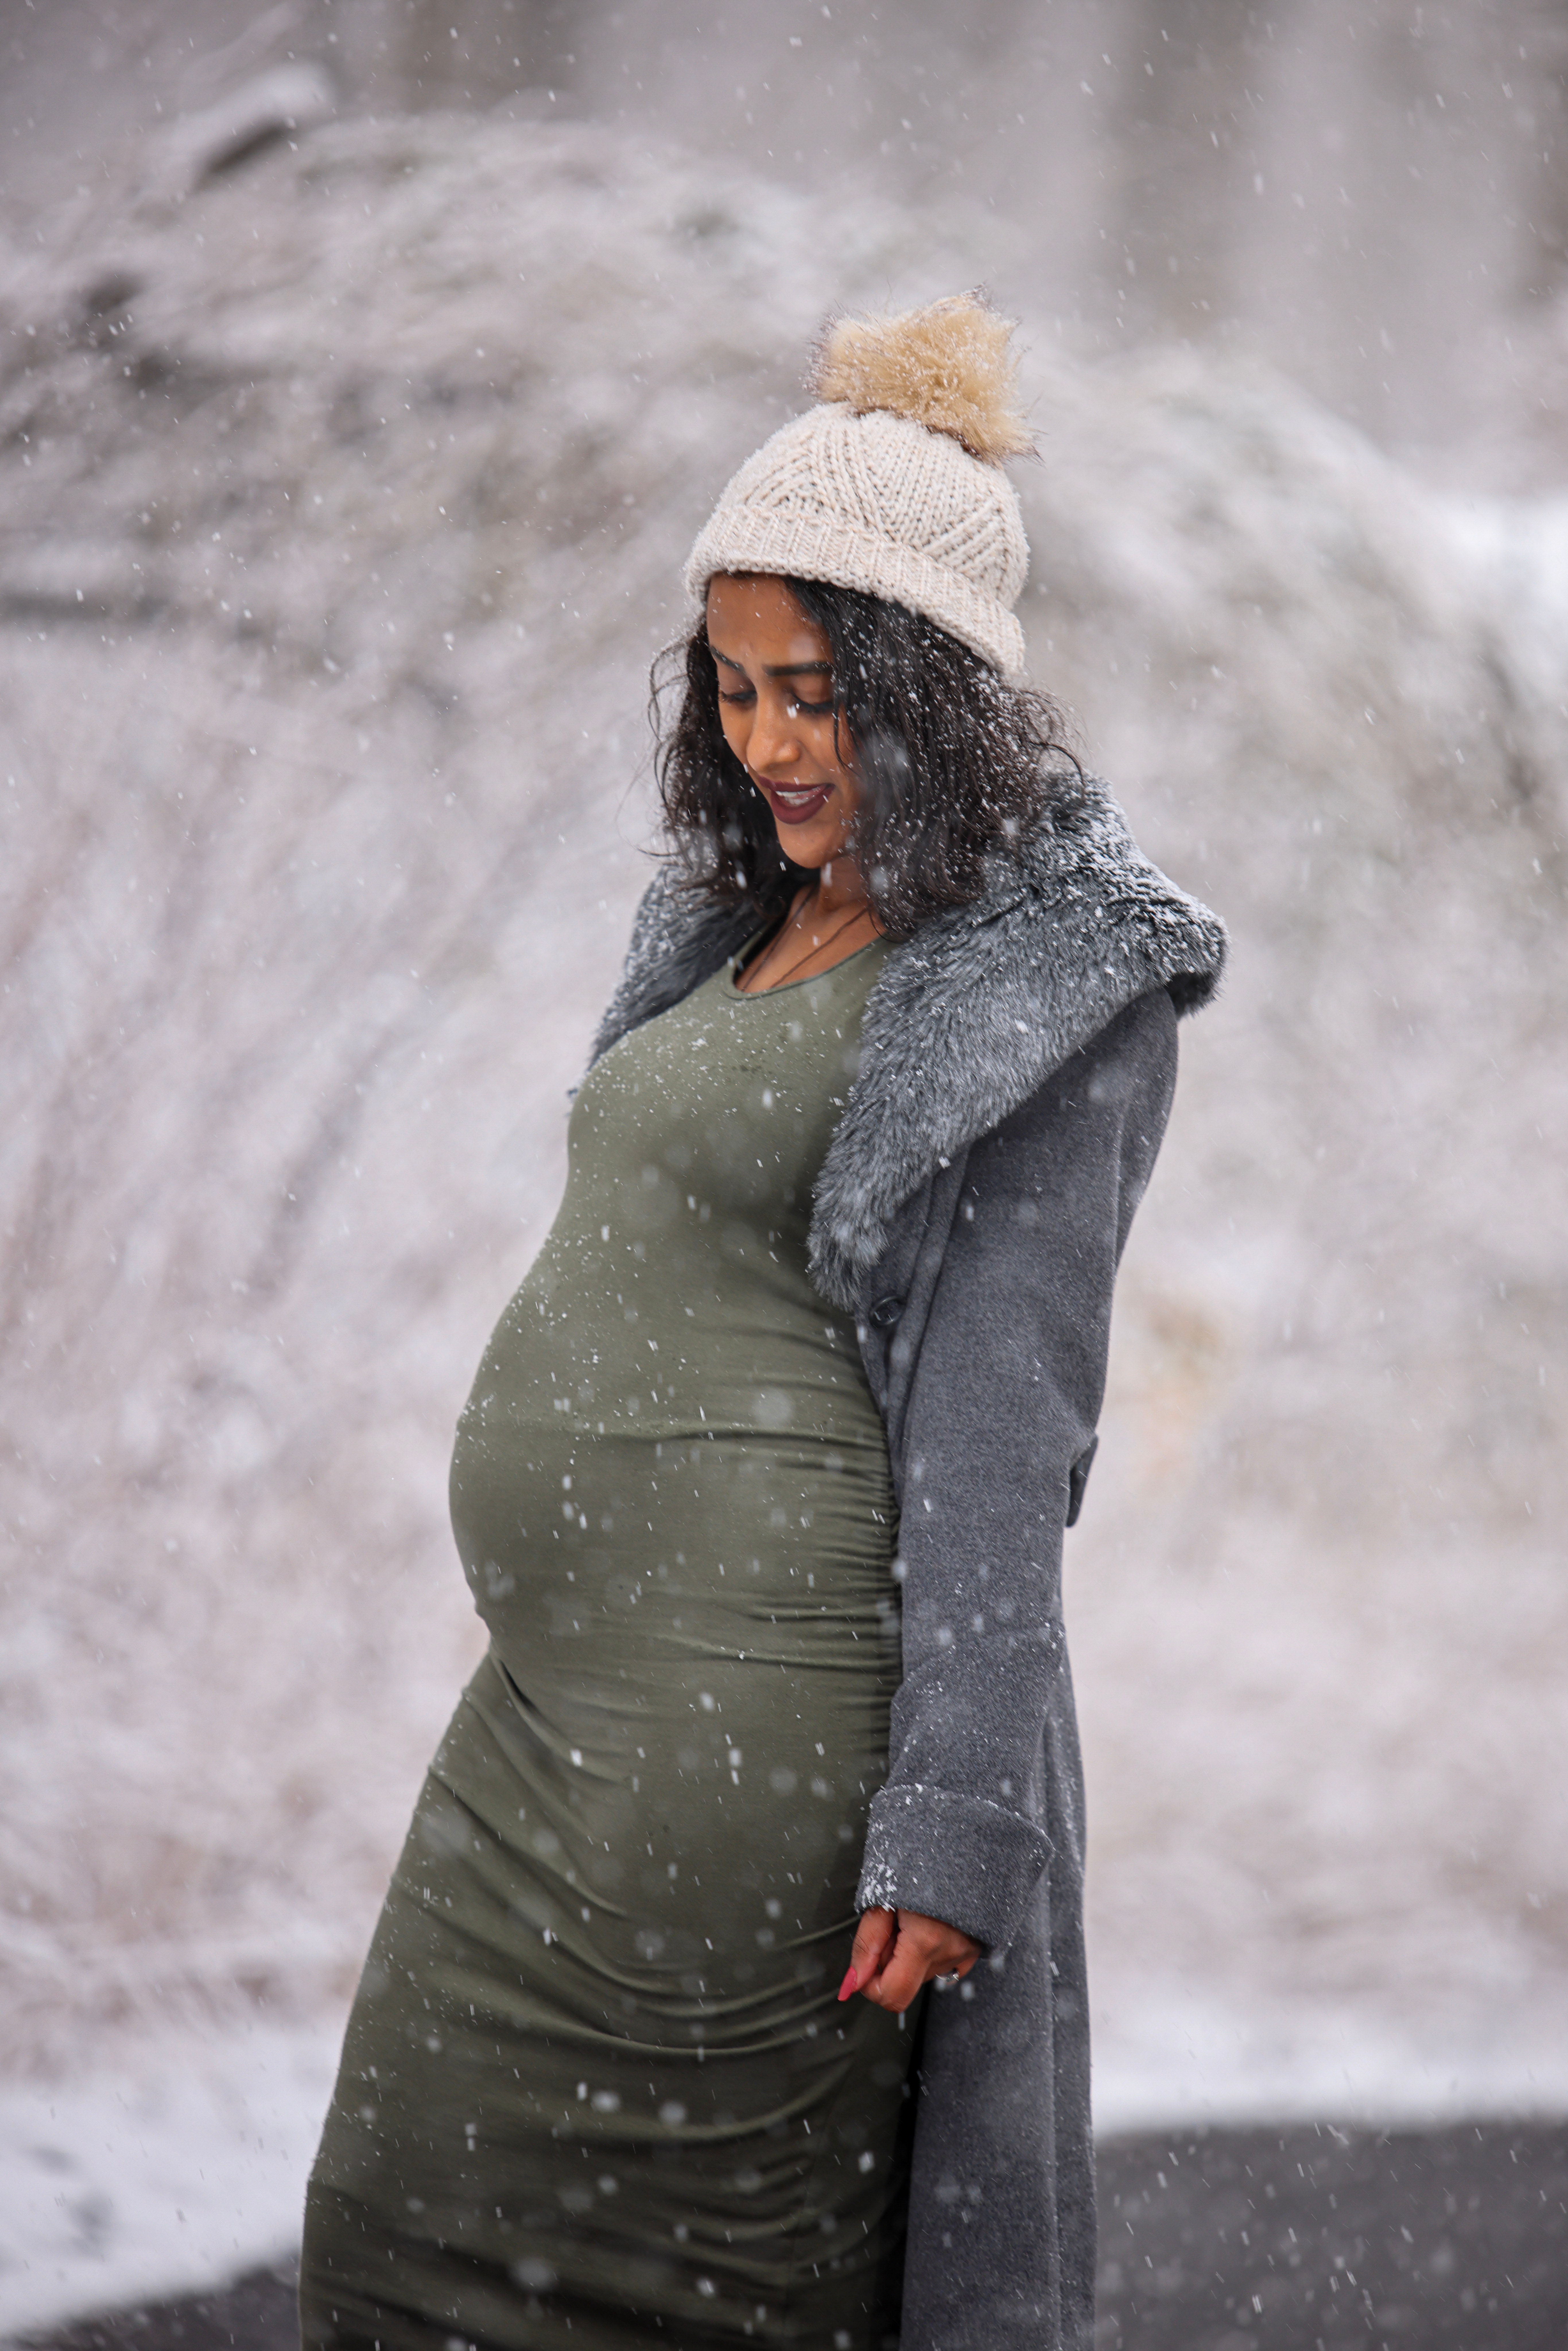 Pregnant woman in a green dress, gray sweater, and cream hat outside in the snow.